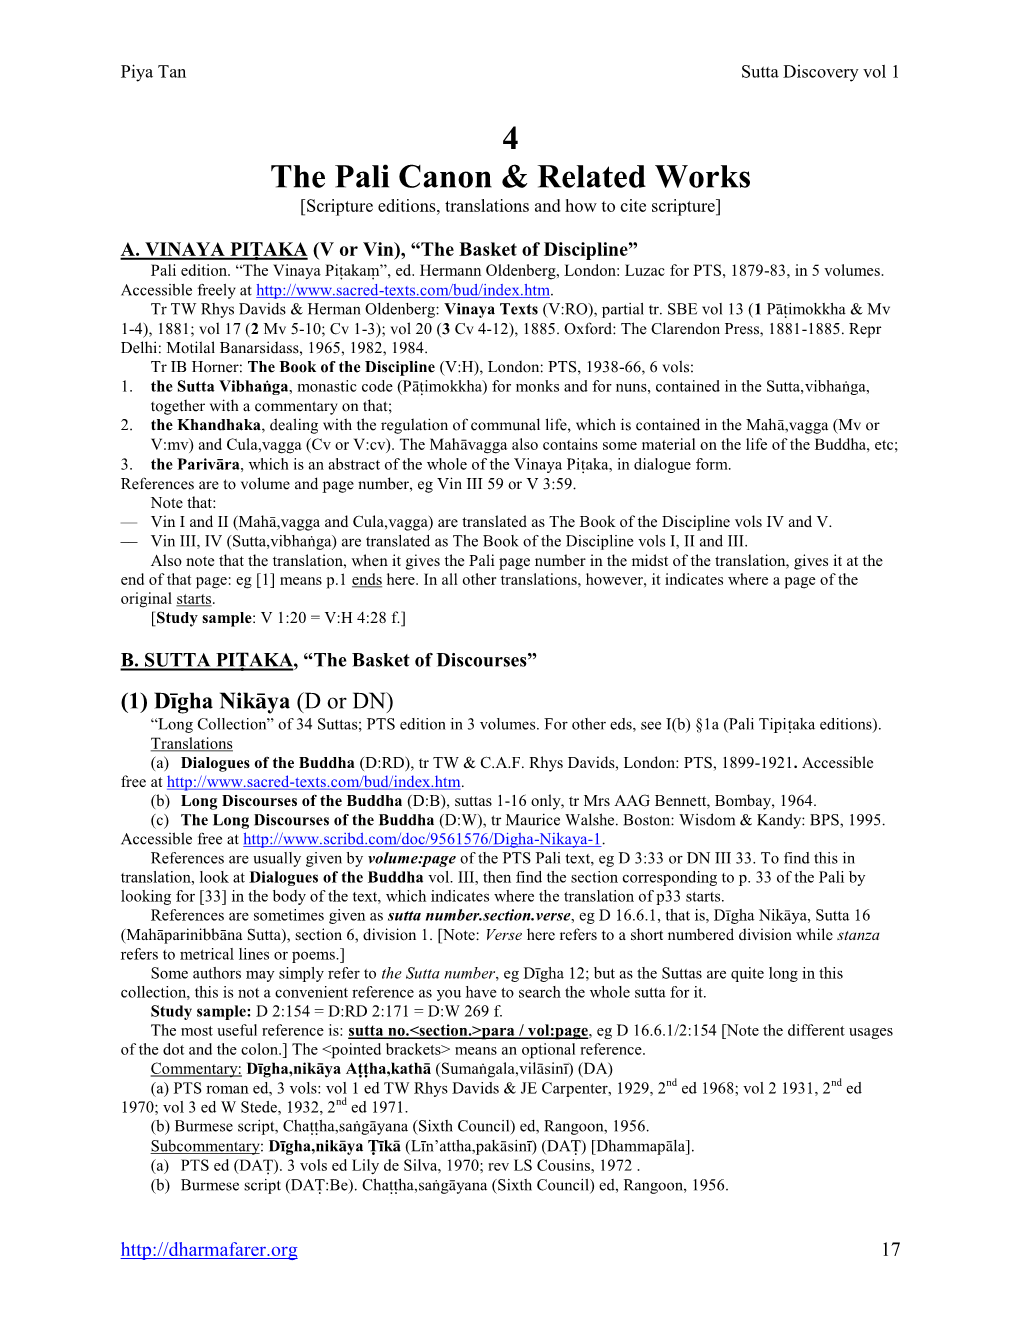 4 the Pali Canon & Related Works